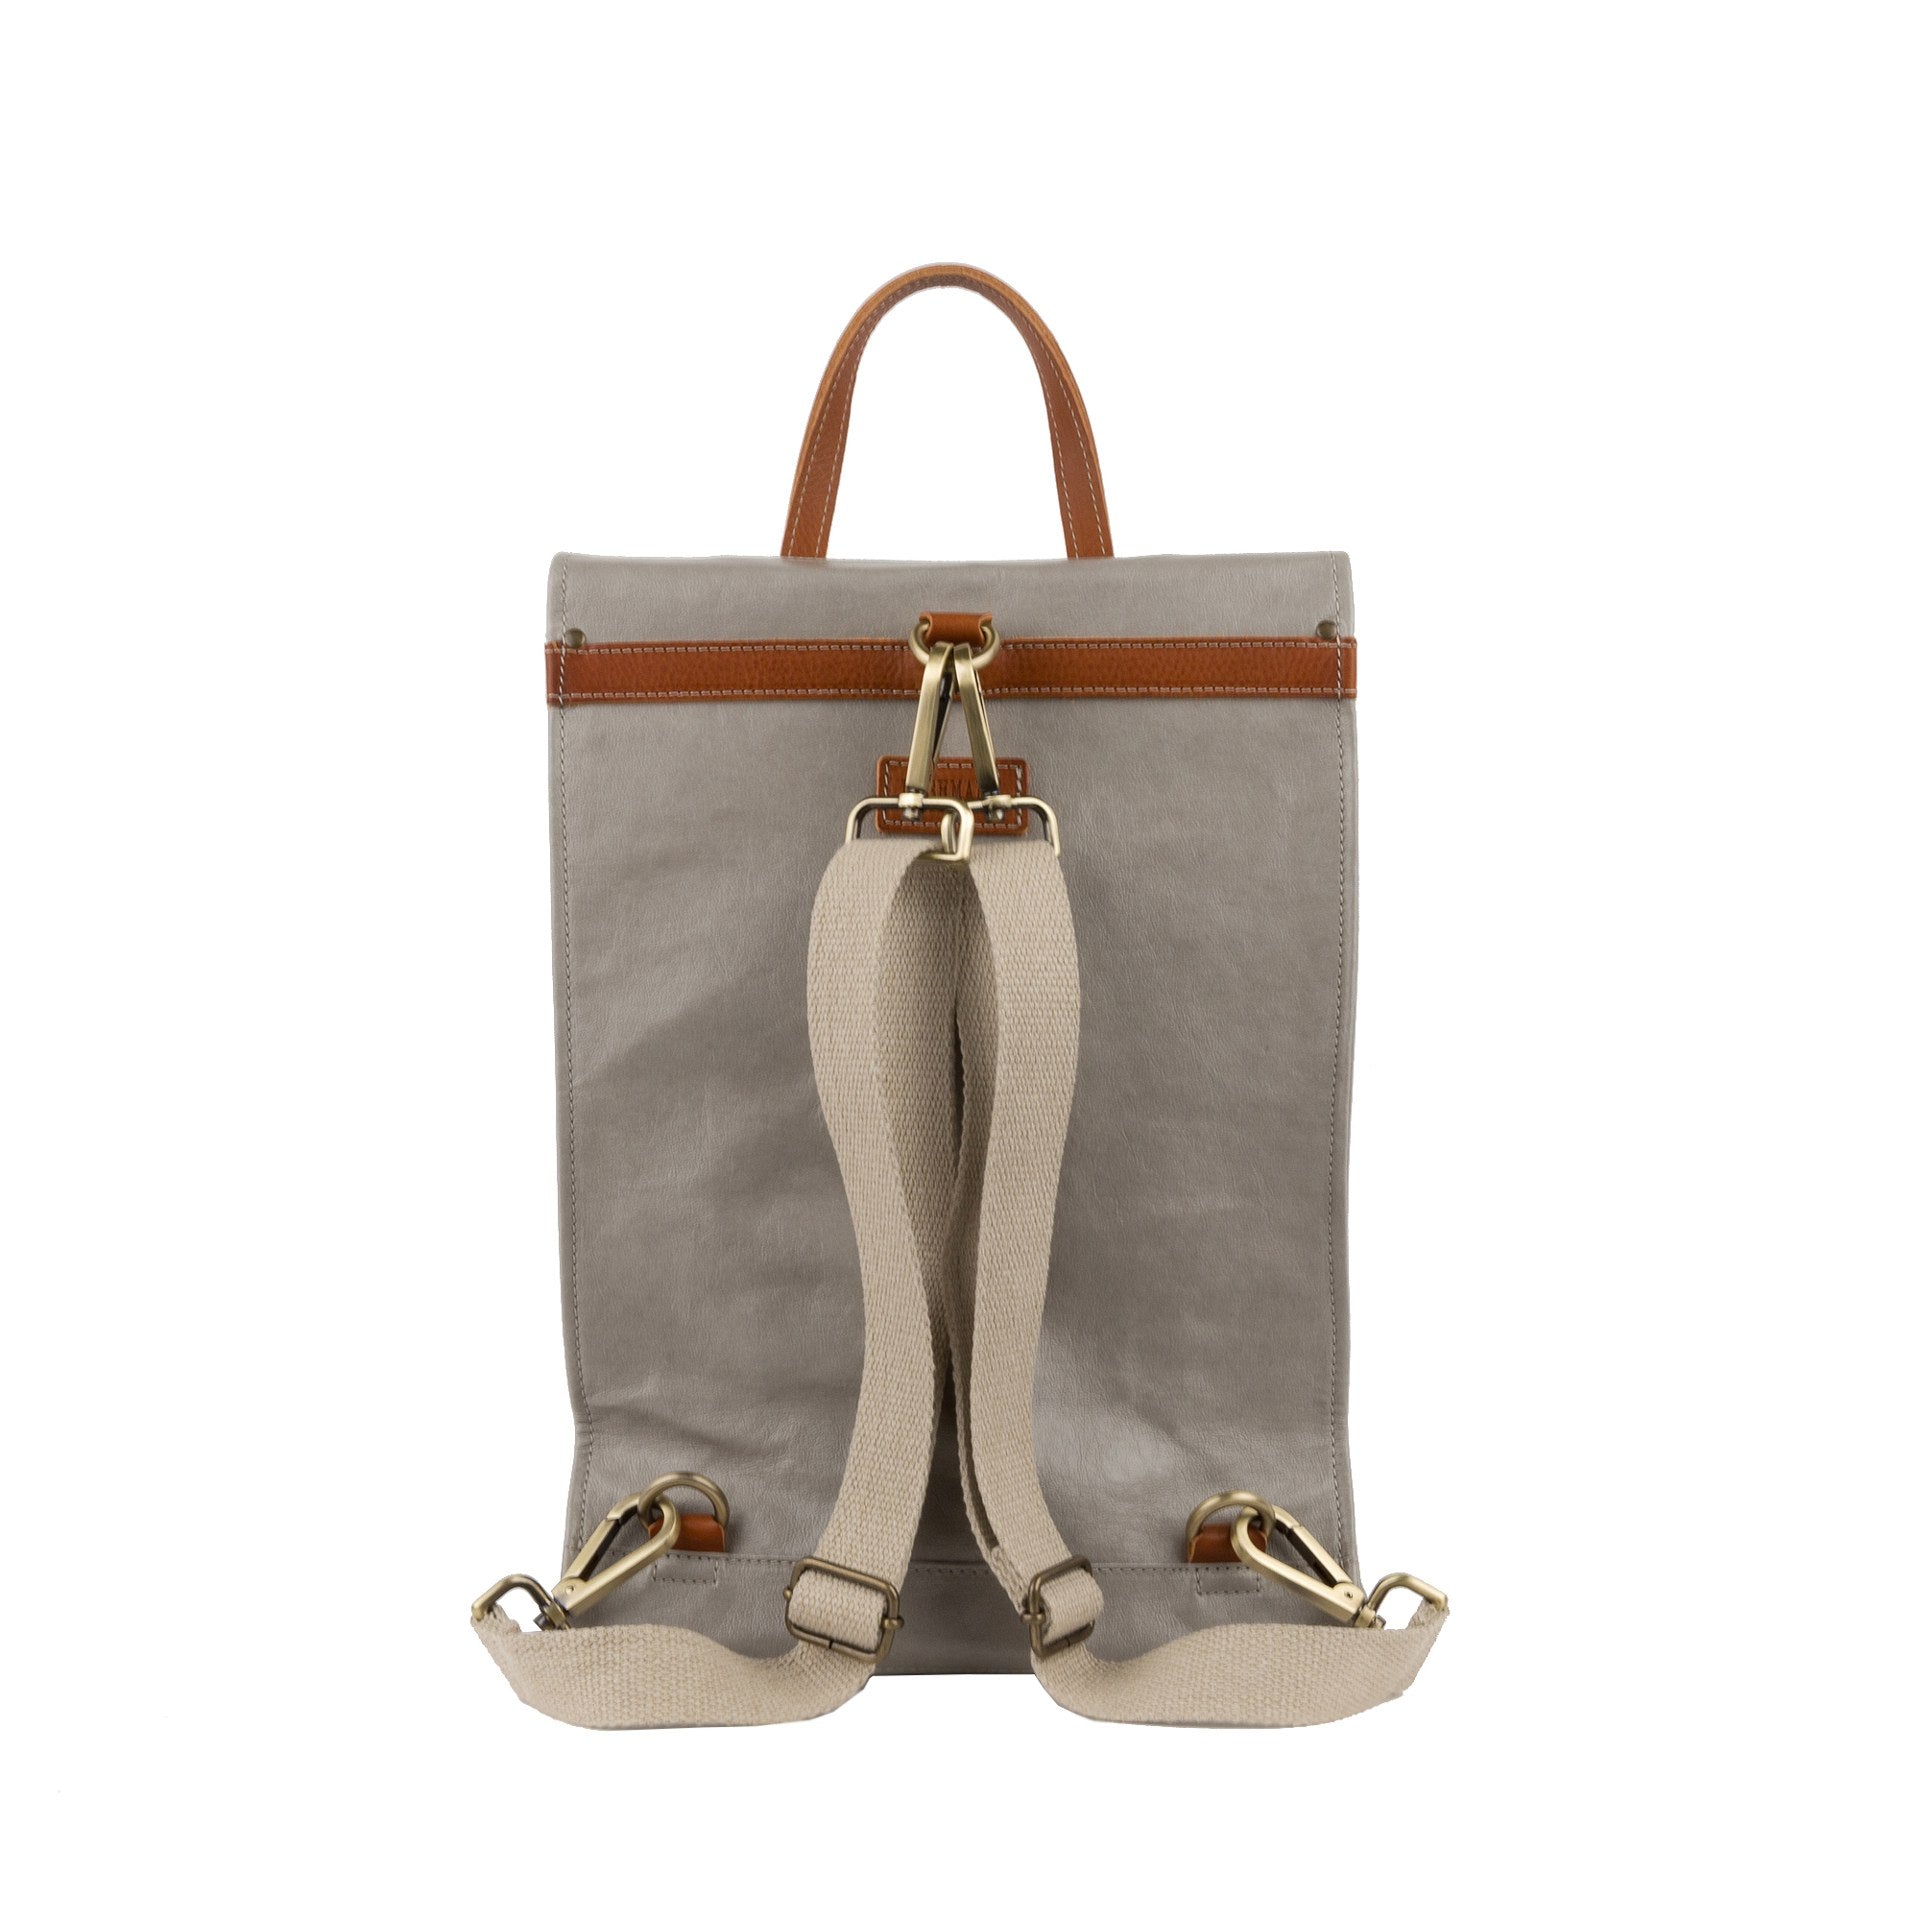 A grey washable paper backpack is shown from the back angle. It features a tan strip across the back, a tan top handle, and cream cotton canvas straps with gold metallic hardware.